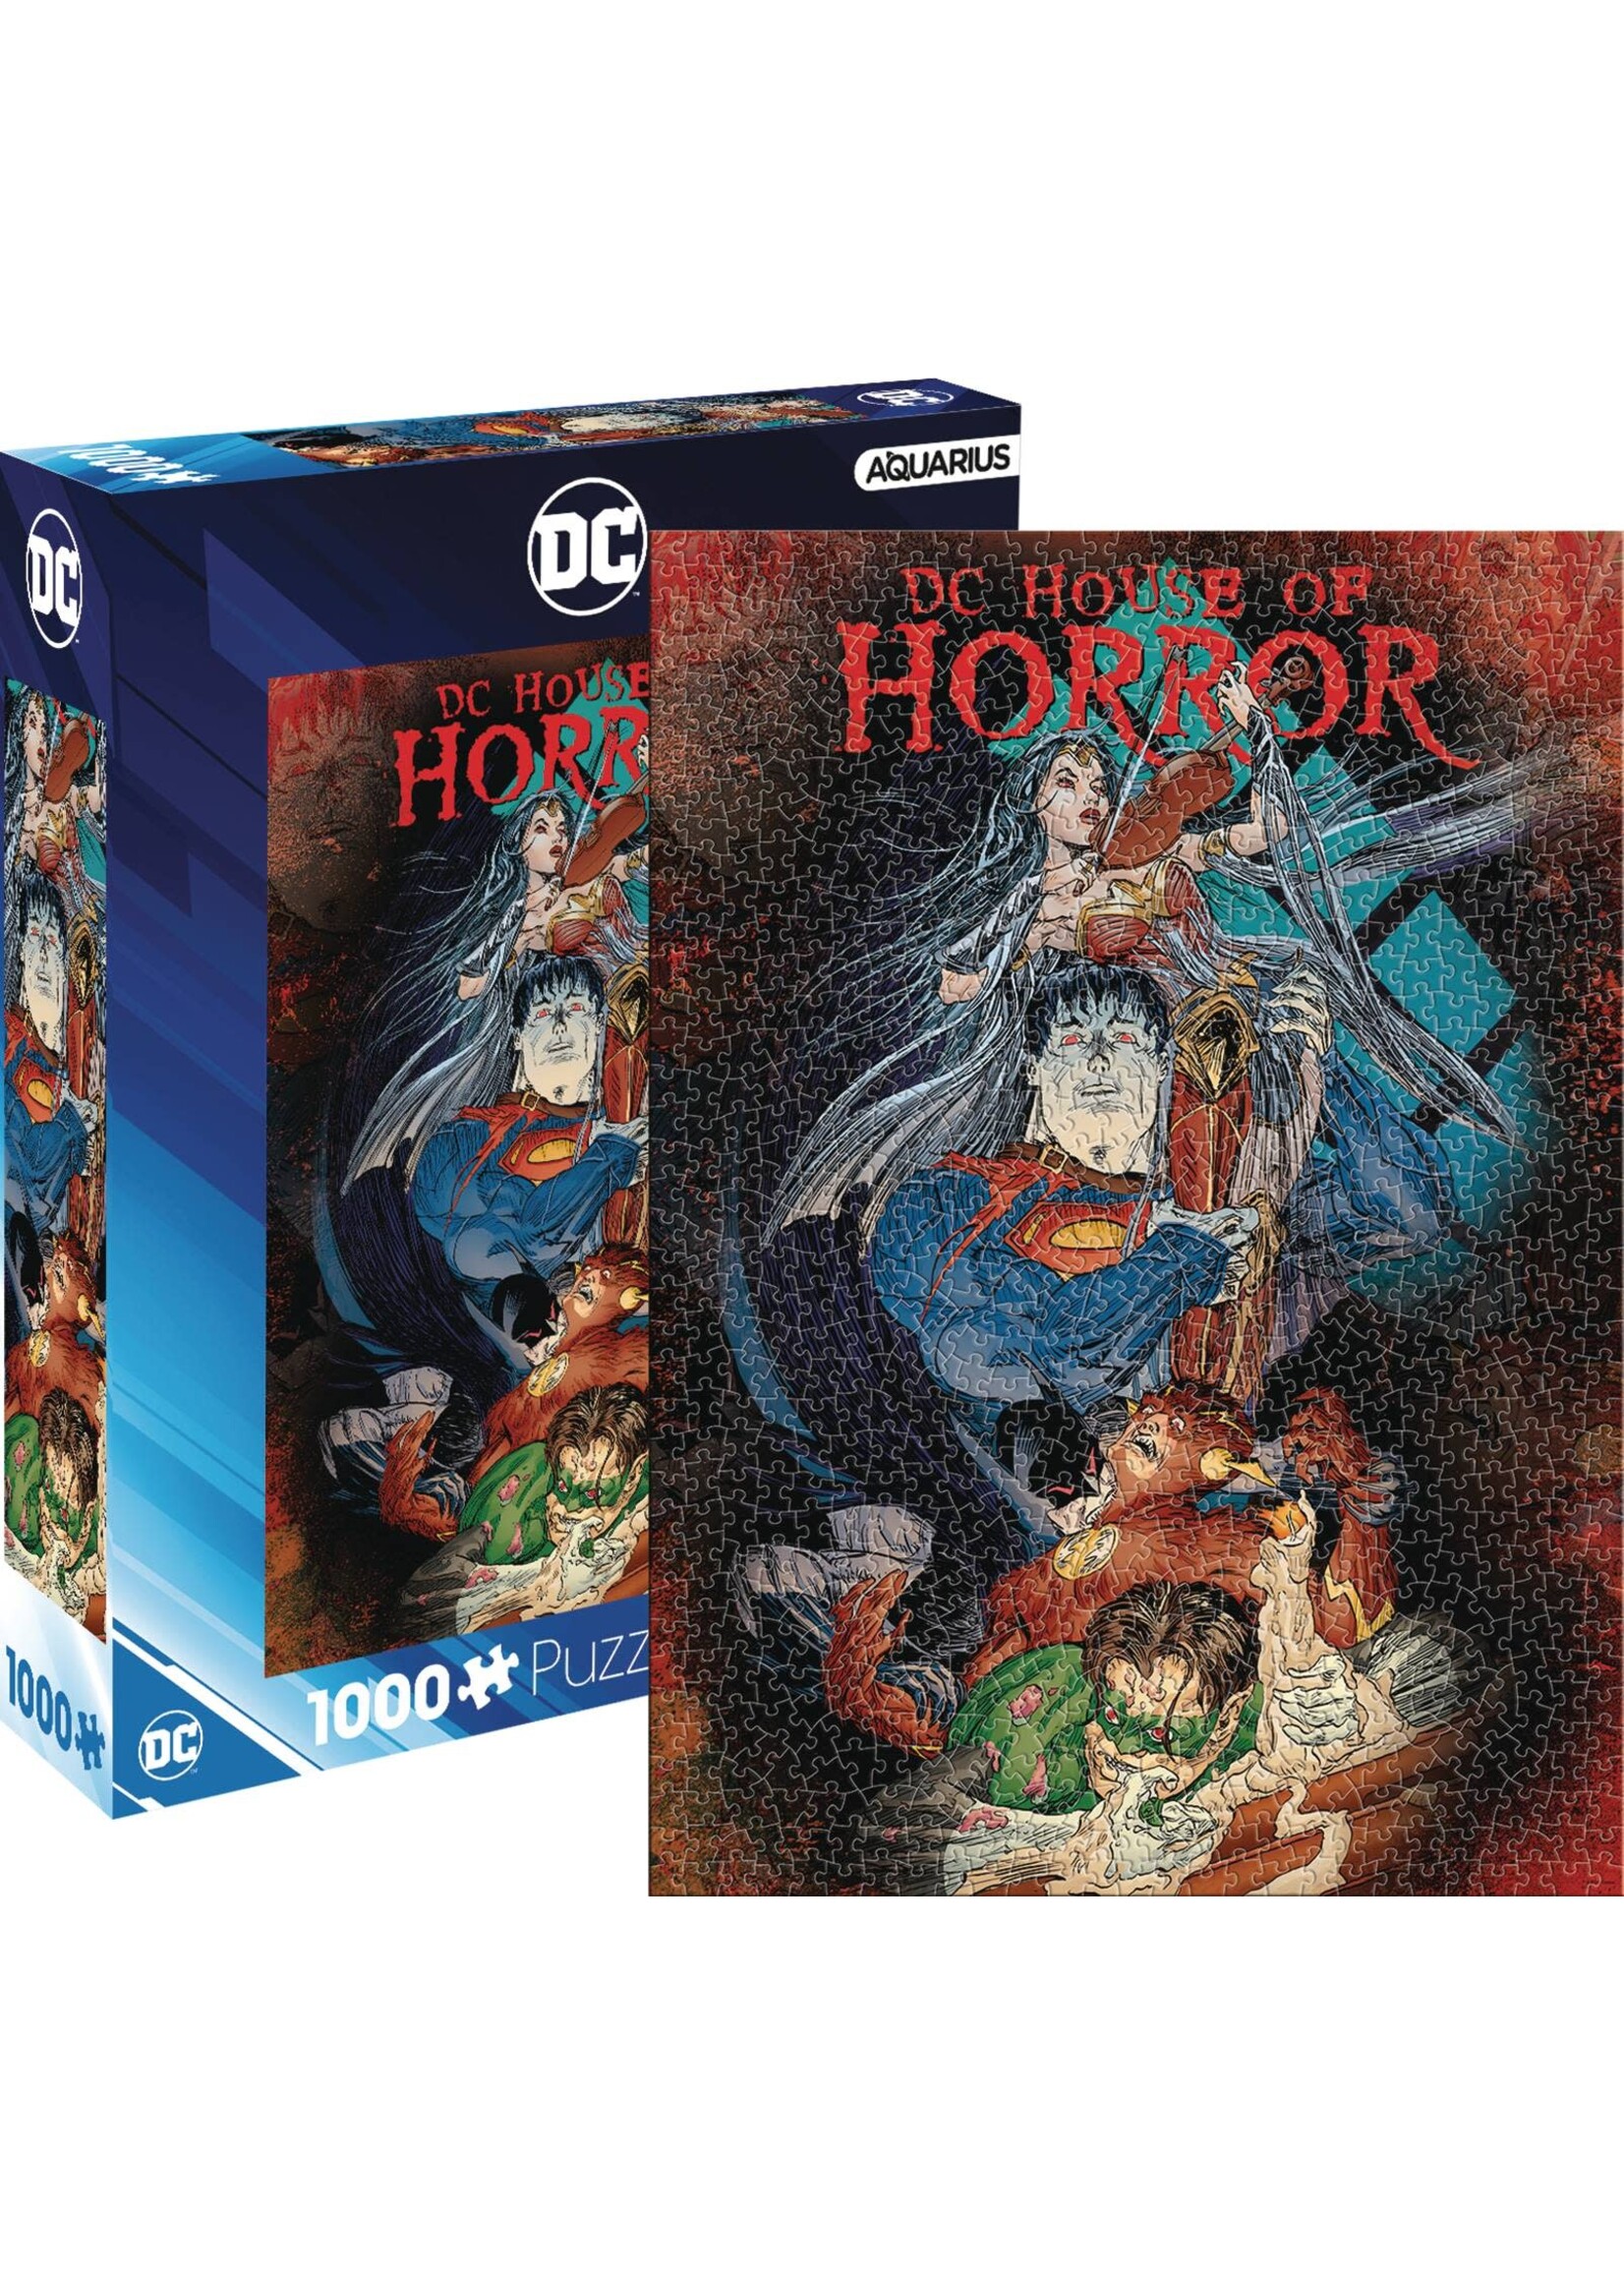 DC HOUSE OF HORROR 1000 PIECE PUZZLE